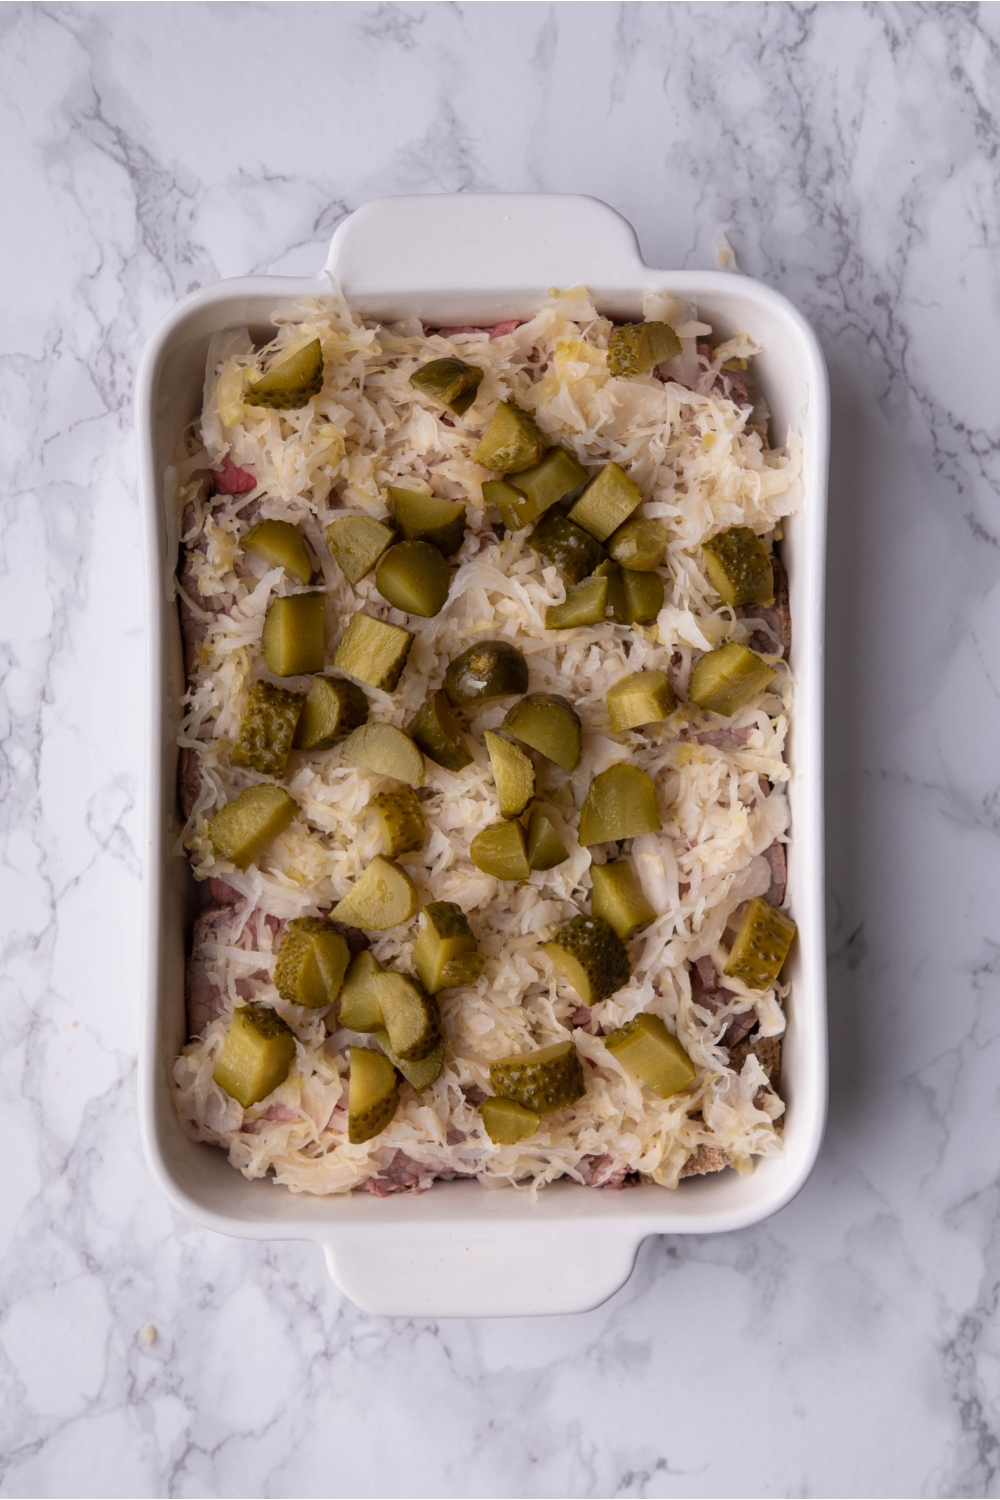 Layers of pickles, sauerkraut, cheese and pastrami in a white baking dish.